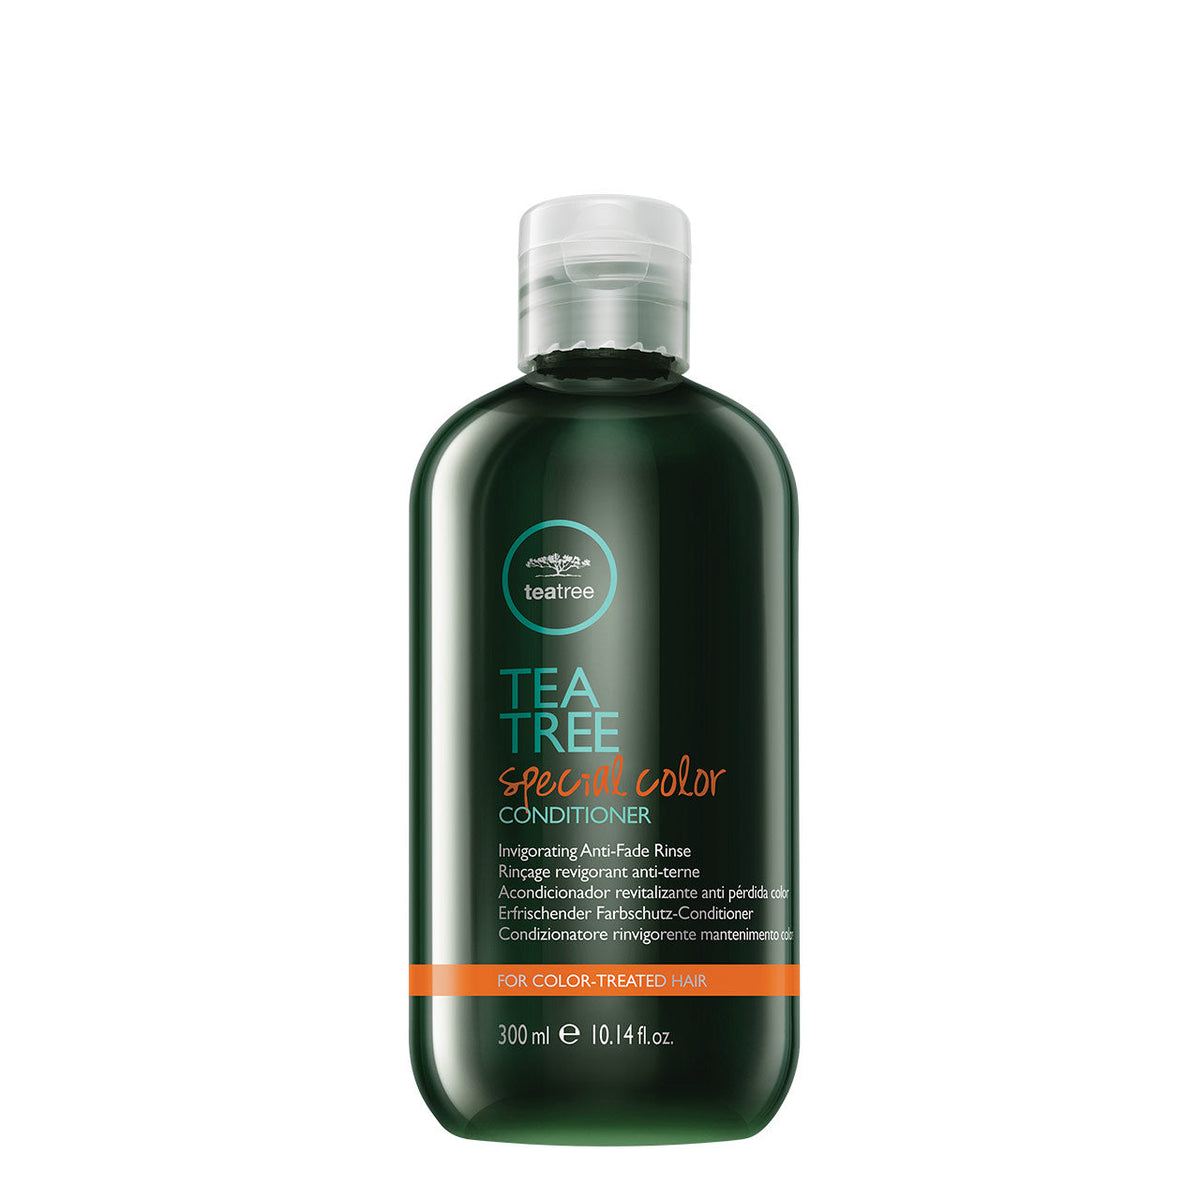 Tea Tree Special Color Conditioner - 300ML - by Paul Mitchell |ProCare Outlet|